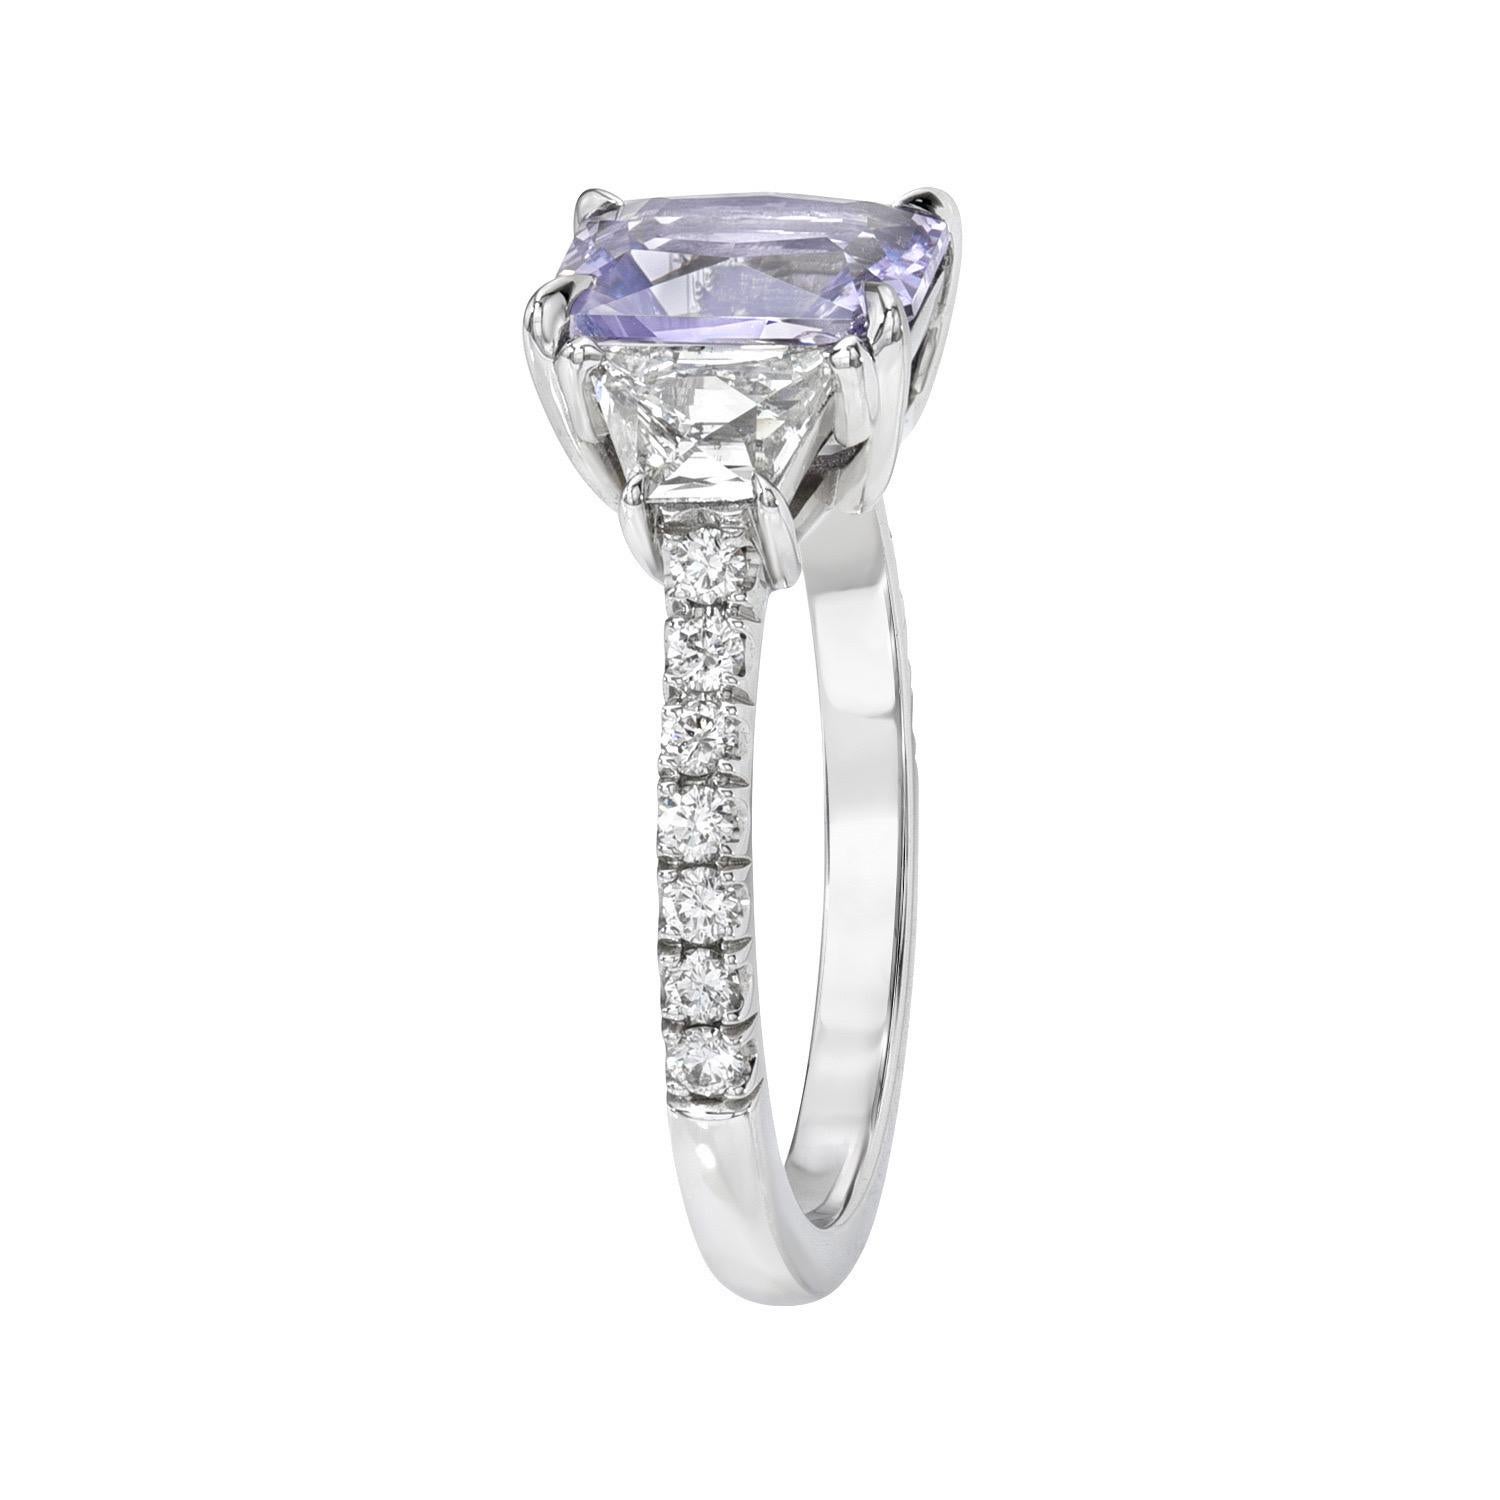 Radiant Cut Unheated Purple Sapphire Ring 2.17 Carat Radiant Natural No Heat For Sale